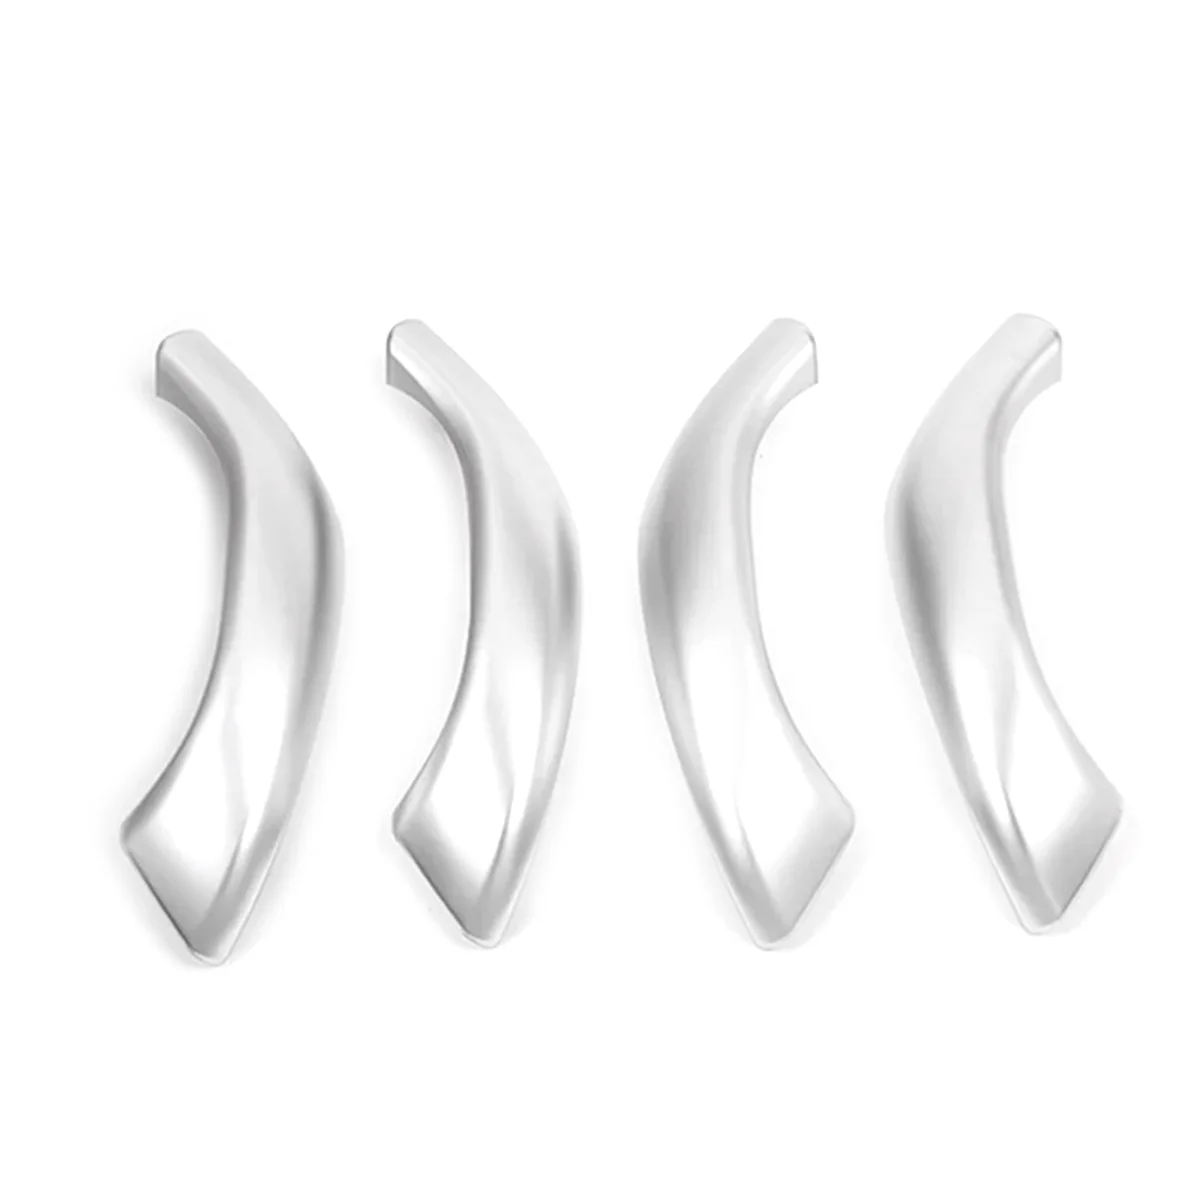 

4Pcs ABS Silver Car Inner Door Handle Cover Trim for BMW X1 F48 2016-2019 X2 F47 2018-2020